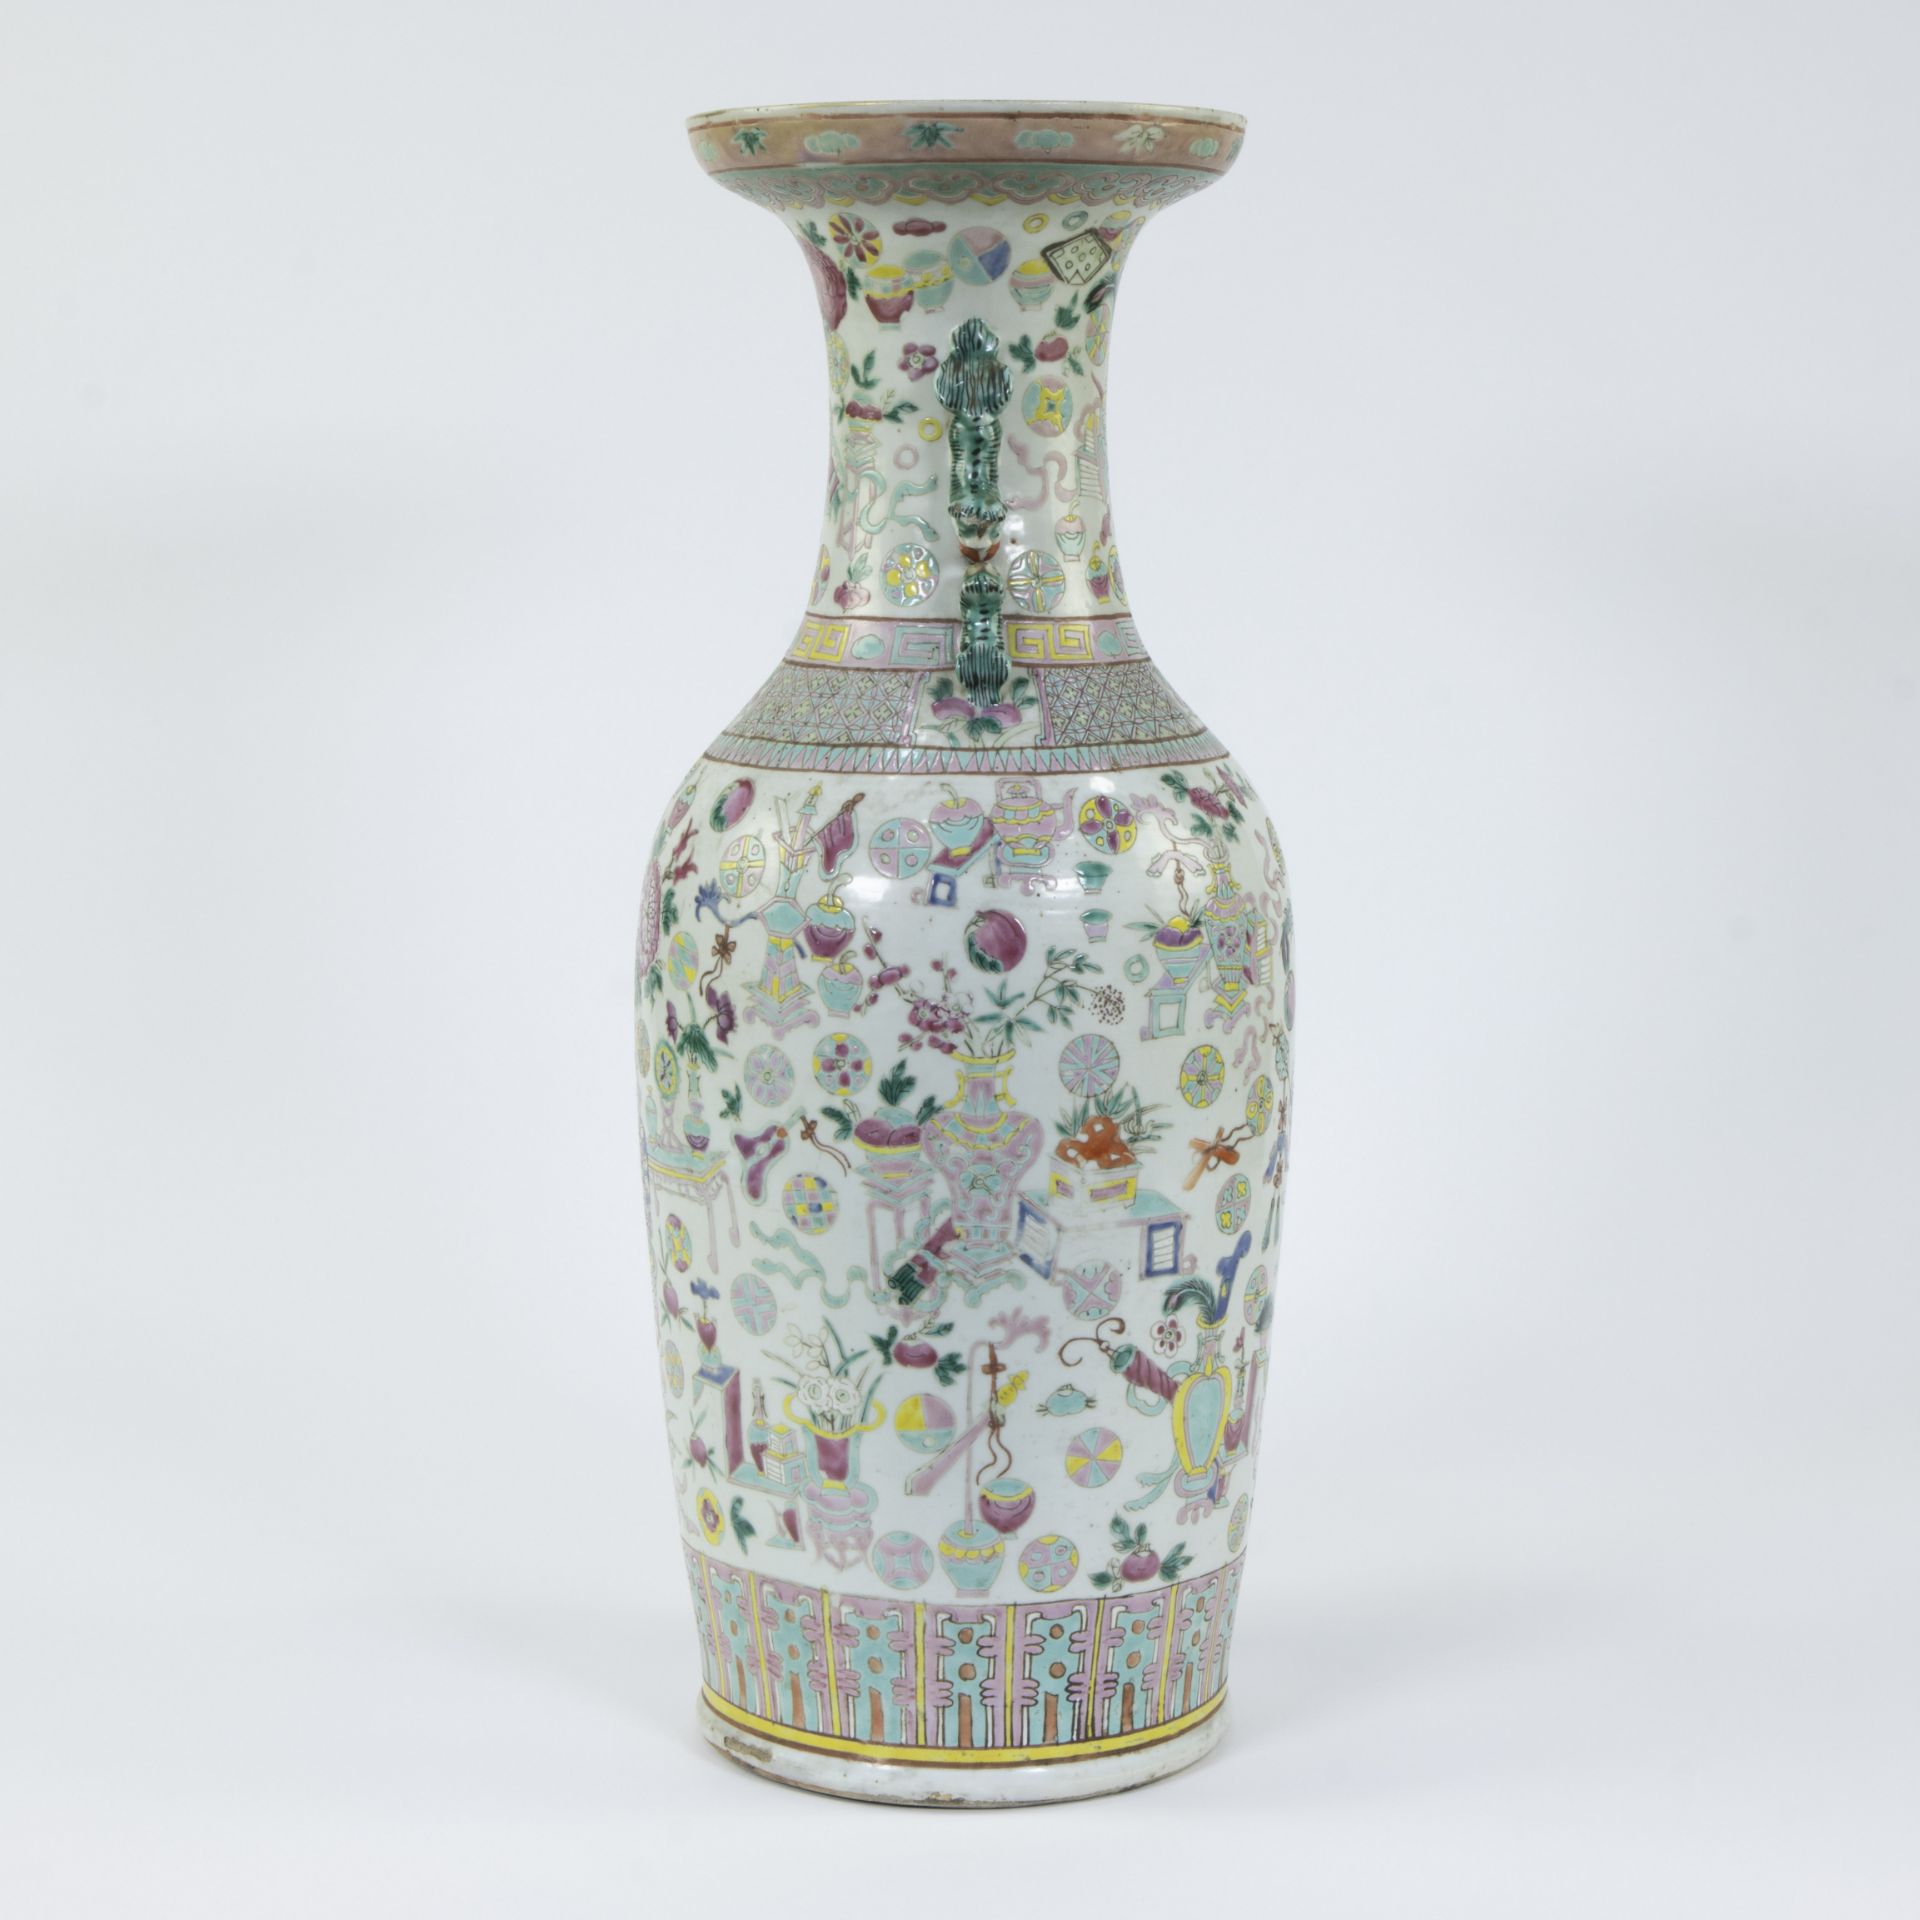 Baluster vase in Chinese porcelain with decoration of valuables, famille rose, 19th century - Image 4 of 6